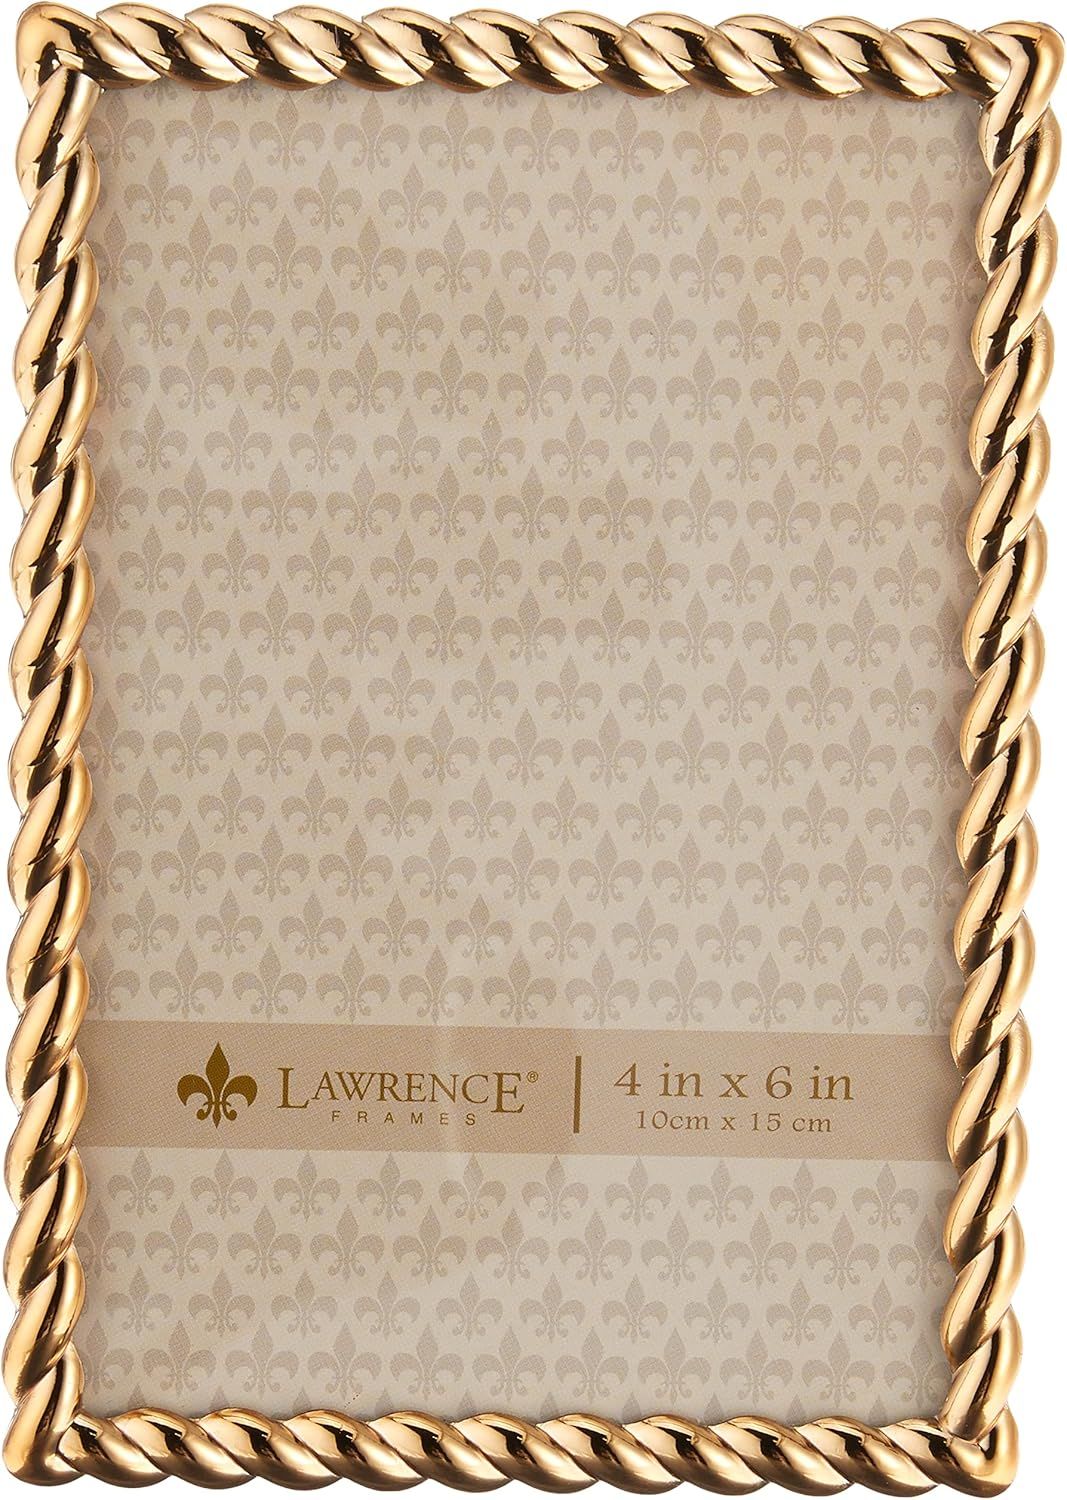 Lawrence Frames Rope Design Metal Frame, 4 x 6, Silver | Amazon (US)